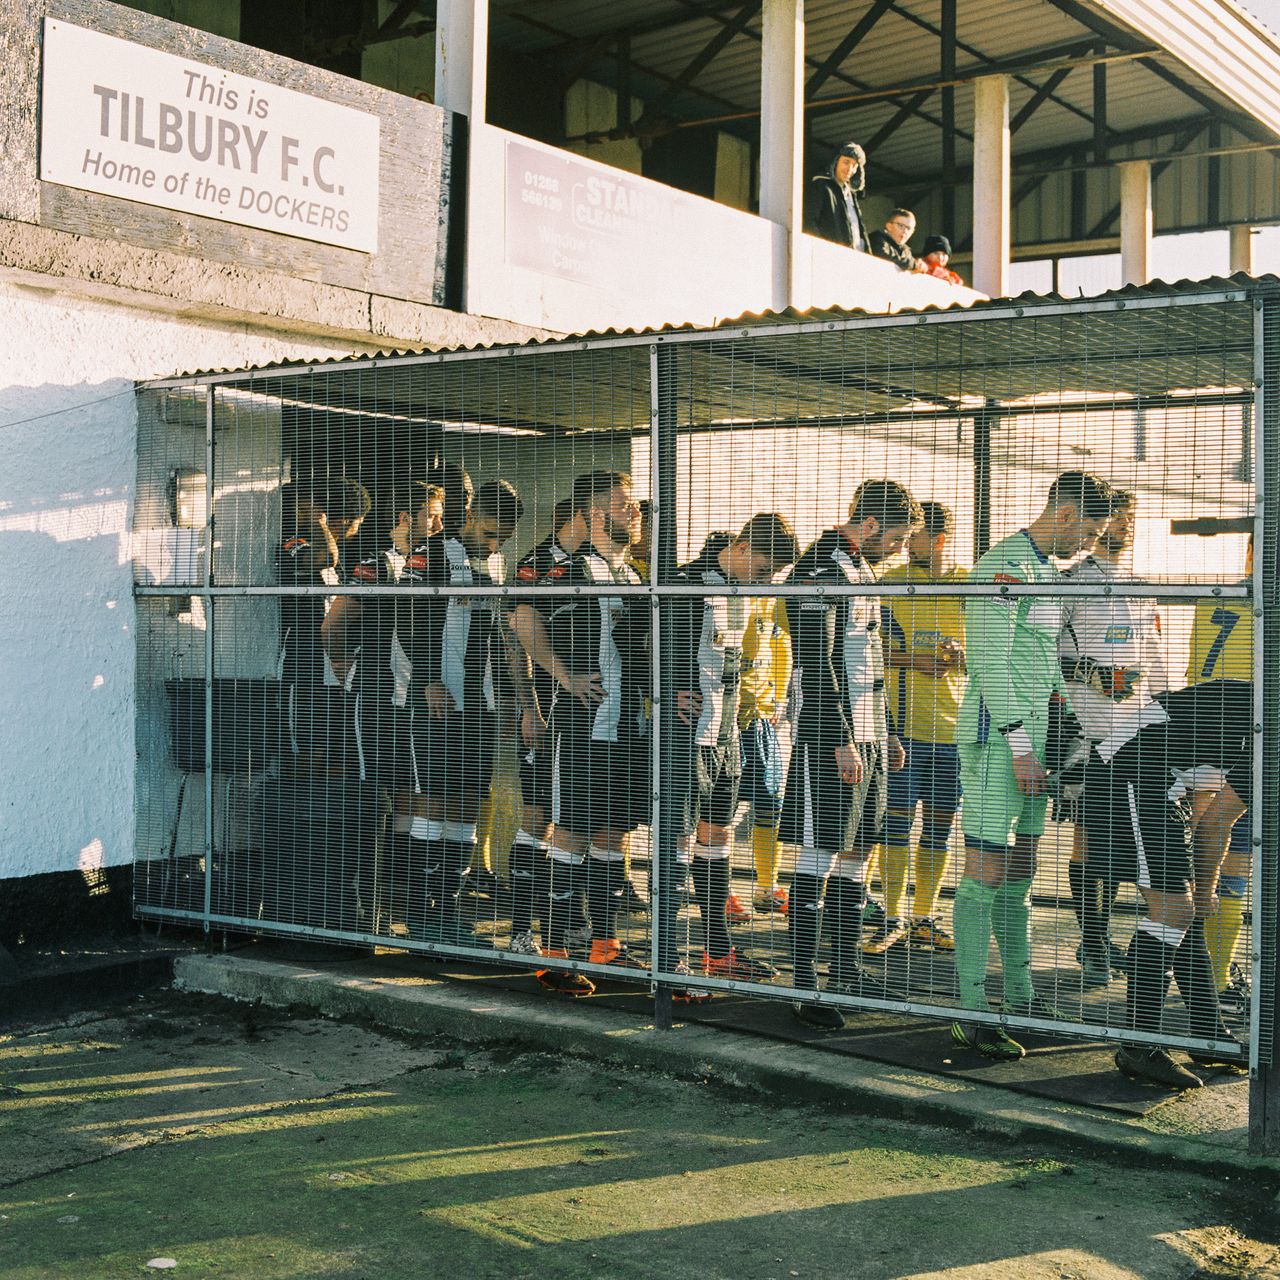 Tilbury F.C. and Haringey Borough F.C. line up in the tunnel at Chadfields ground on Jan. 14 in Tilbury, England.